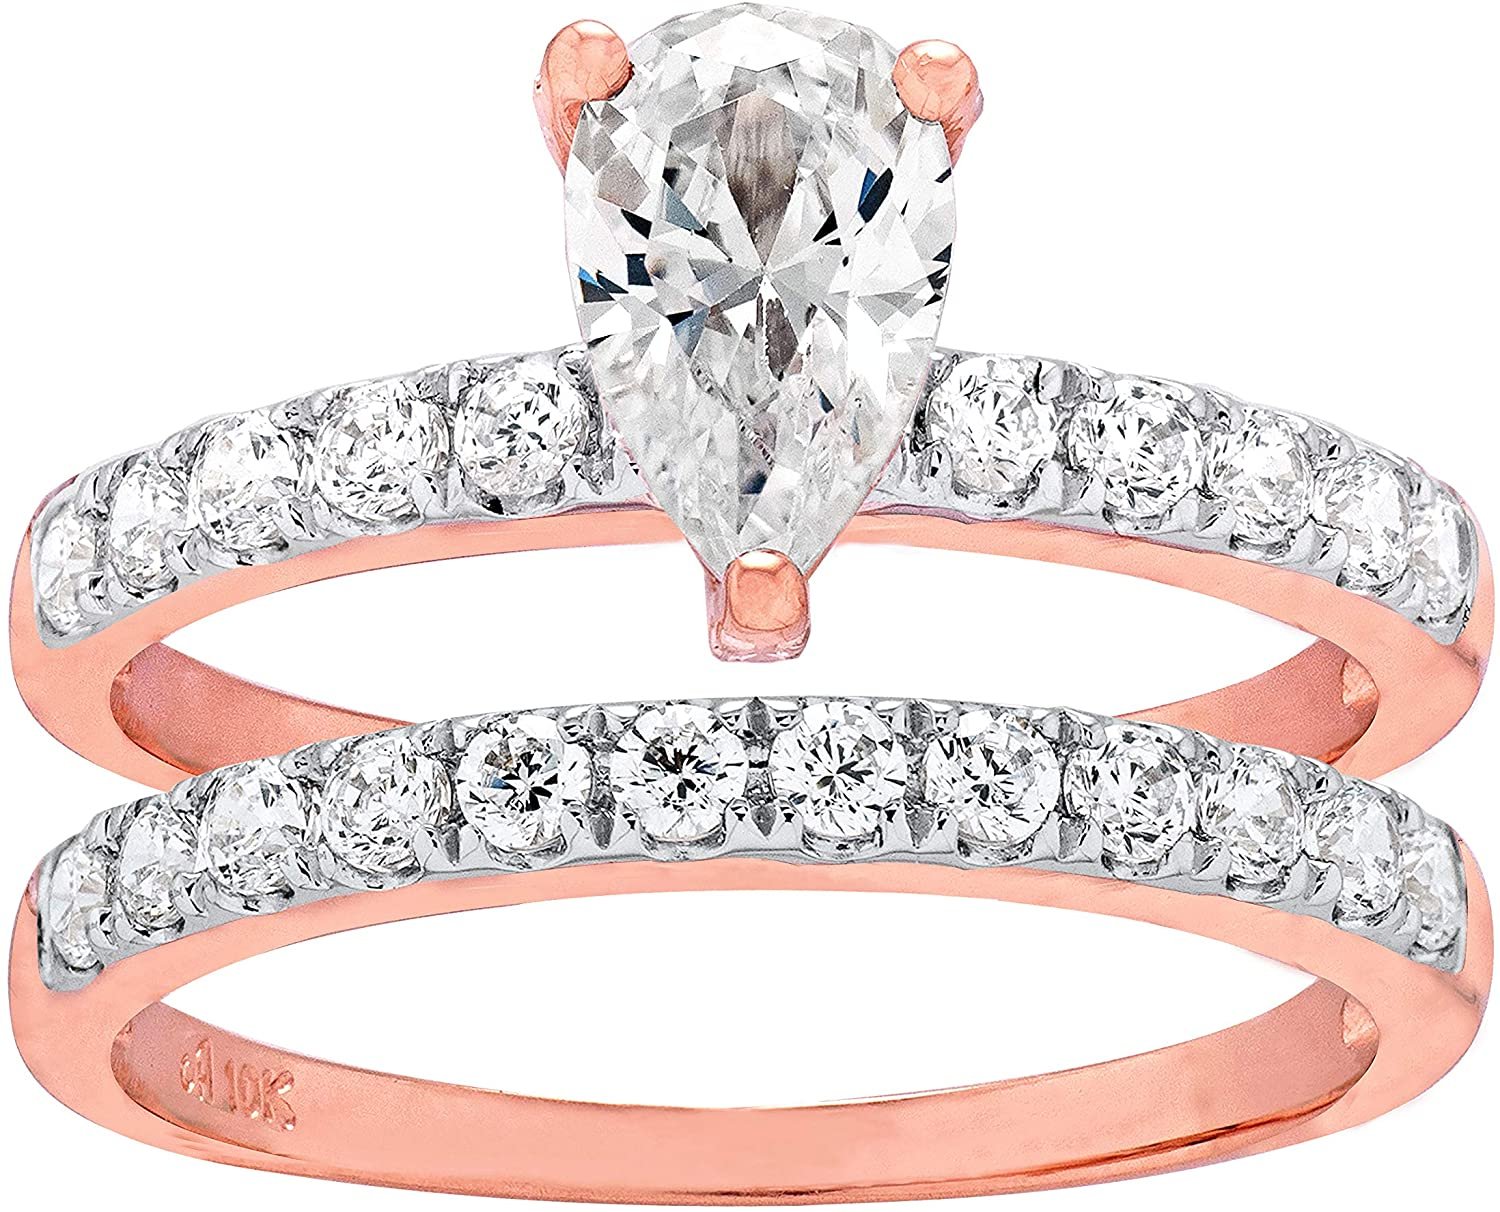 10K Rose Gold & Pear Shape Cubic Zirconia Solitaire on Half Eternity Band Engagement Ring and Wedding Band Bridal Set